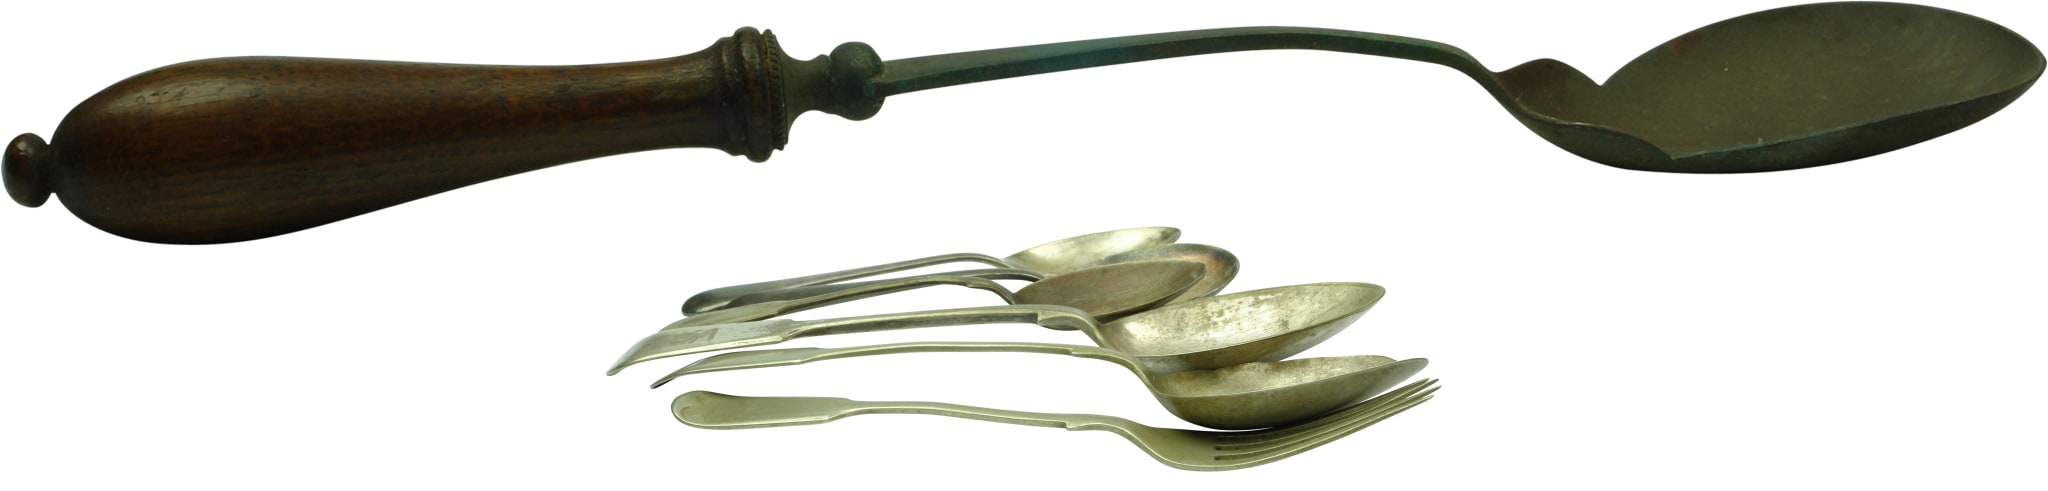 Old Spoons and Fork